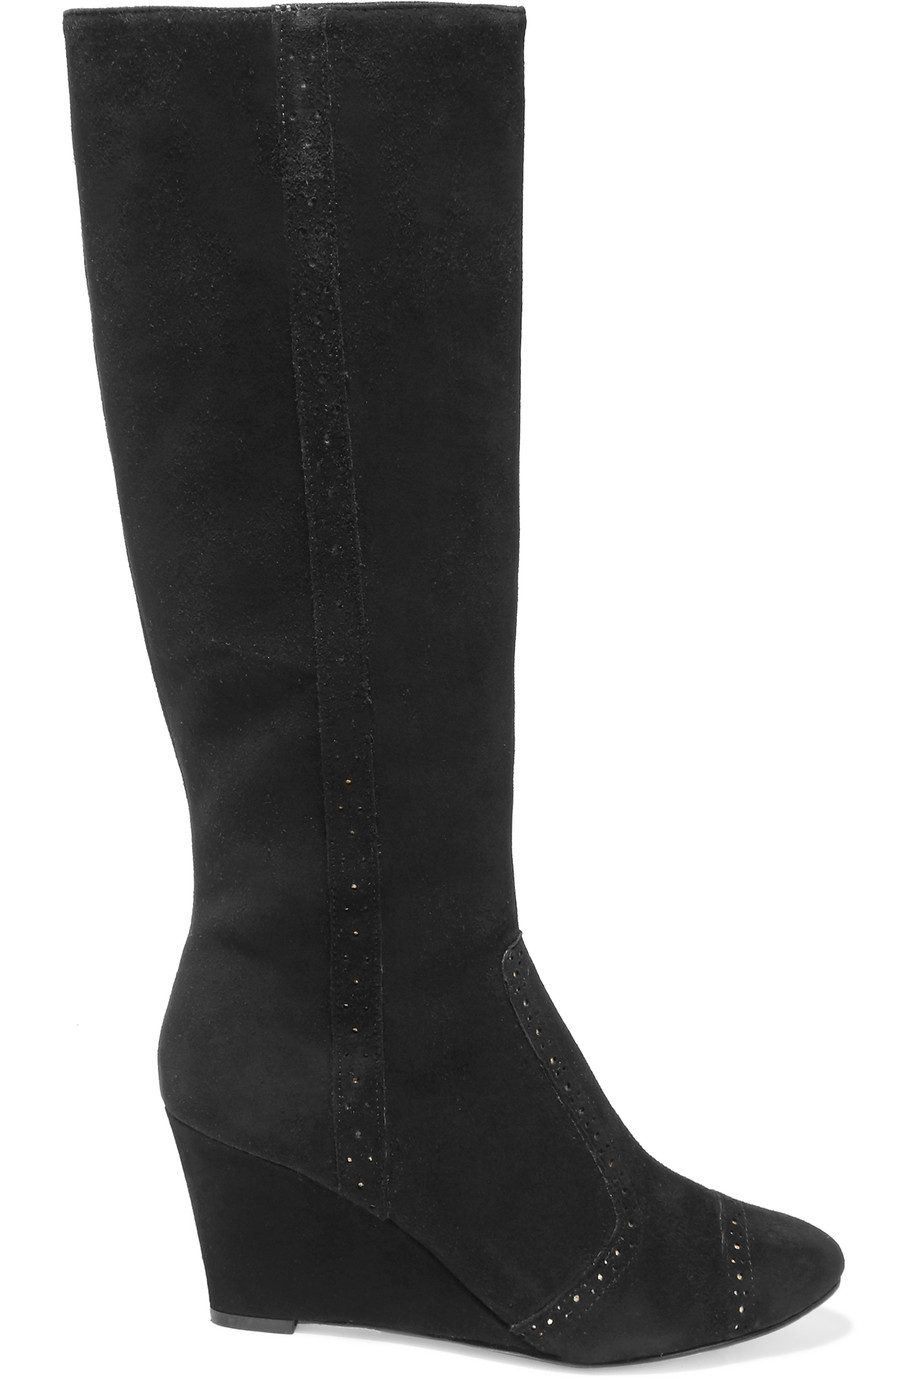 Lucy Choi London Cheltenham Perforated Suede Wedge Boots | ModeSens